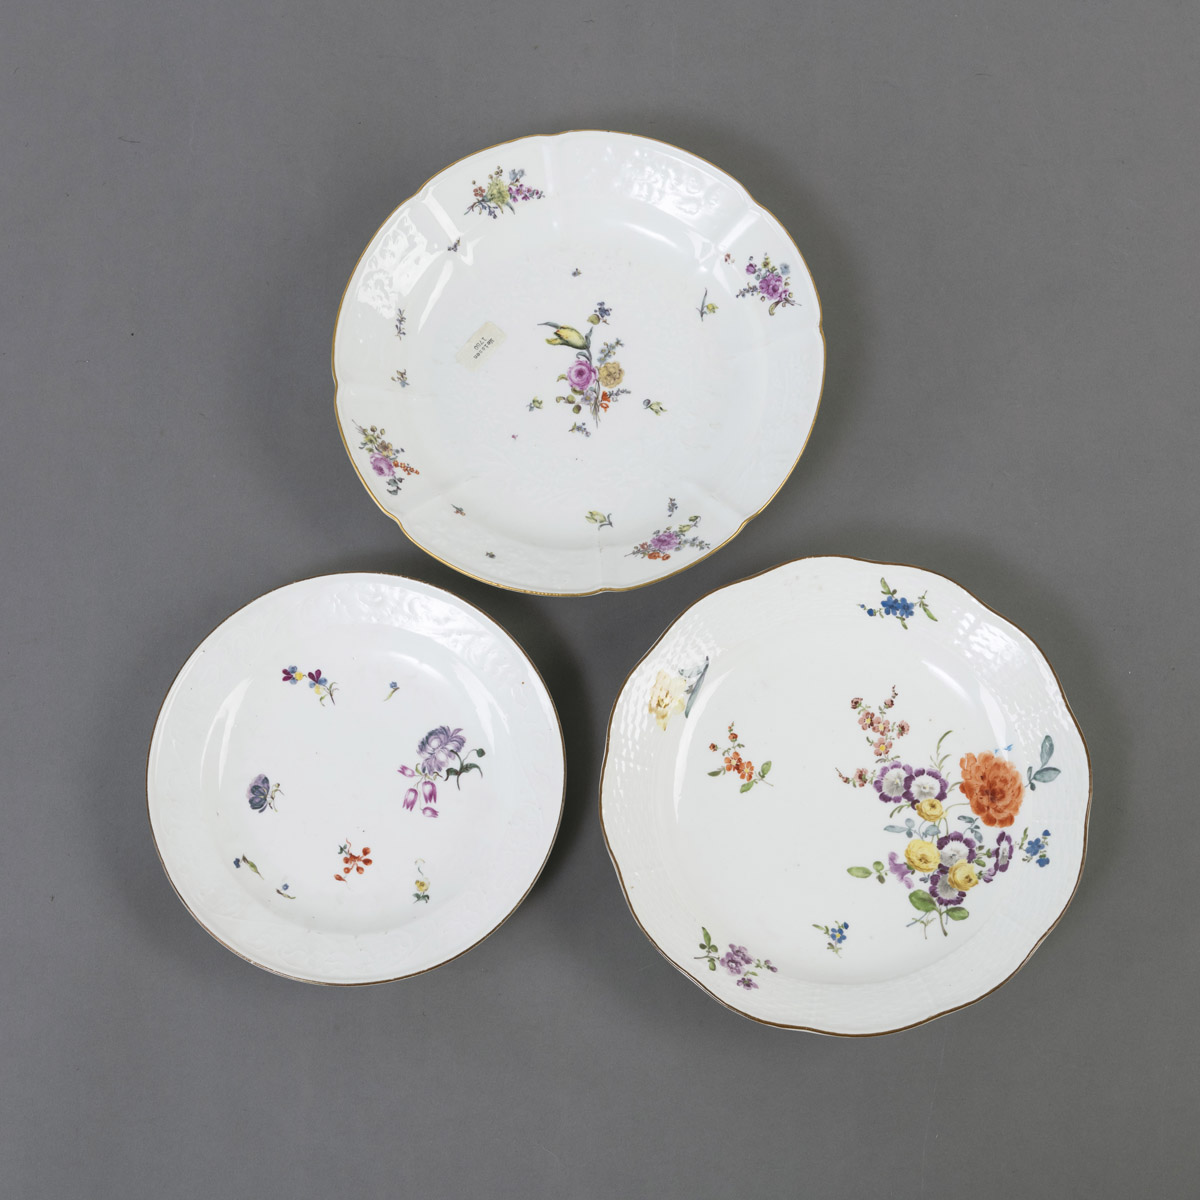 A MEISSEN FLORAL PAINTED PLATE AND TWO ROUND DISHES